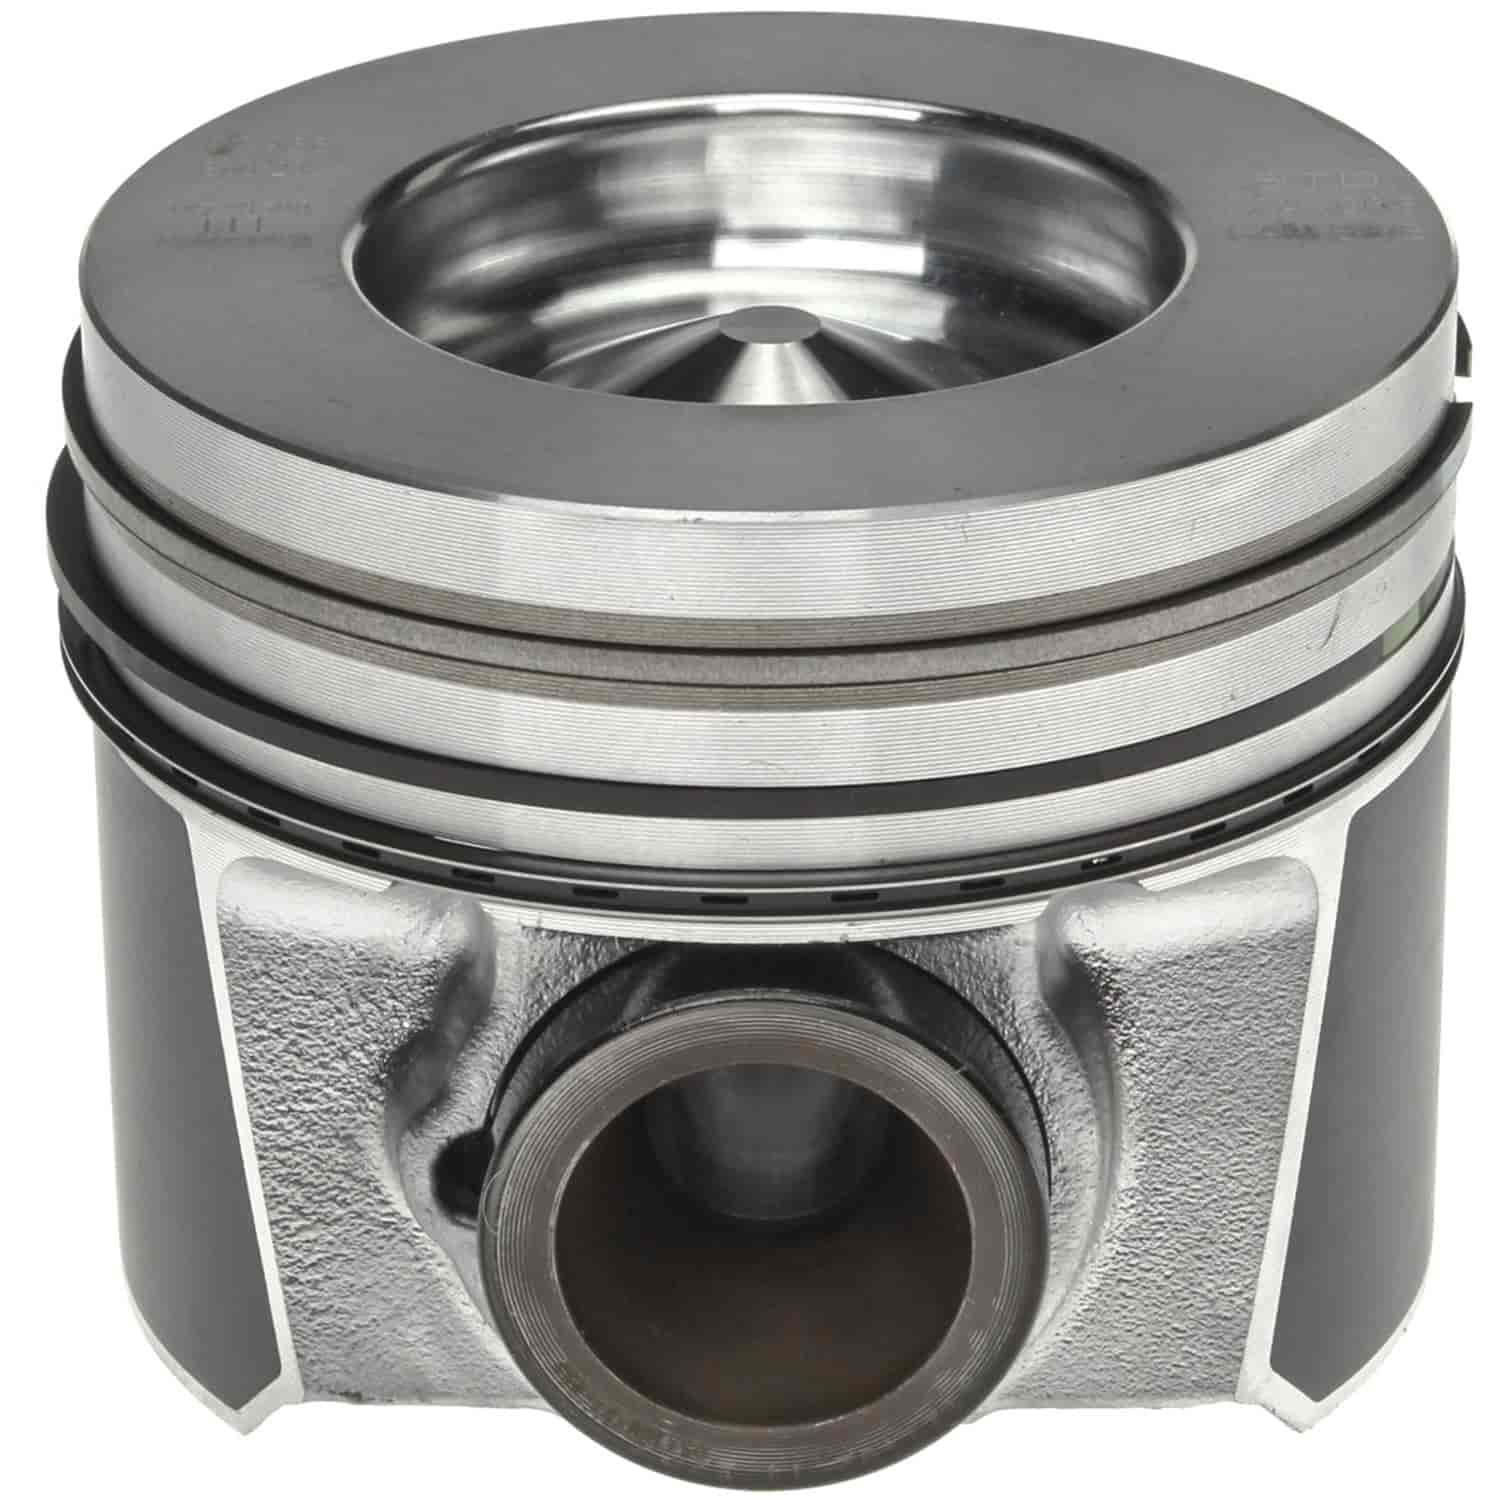 Piston with Rings 2008-2010 Ford/Navistar Powerstroke Diesel V8 6.4L with 3.86"/98mm Bore (Standard)